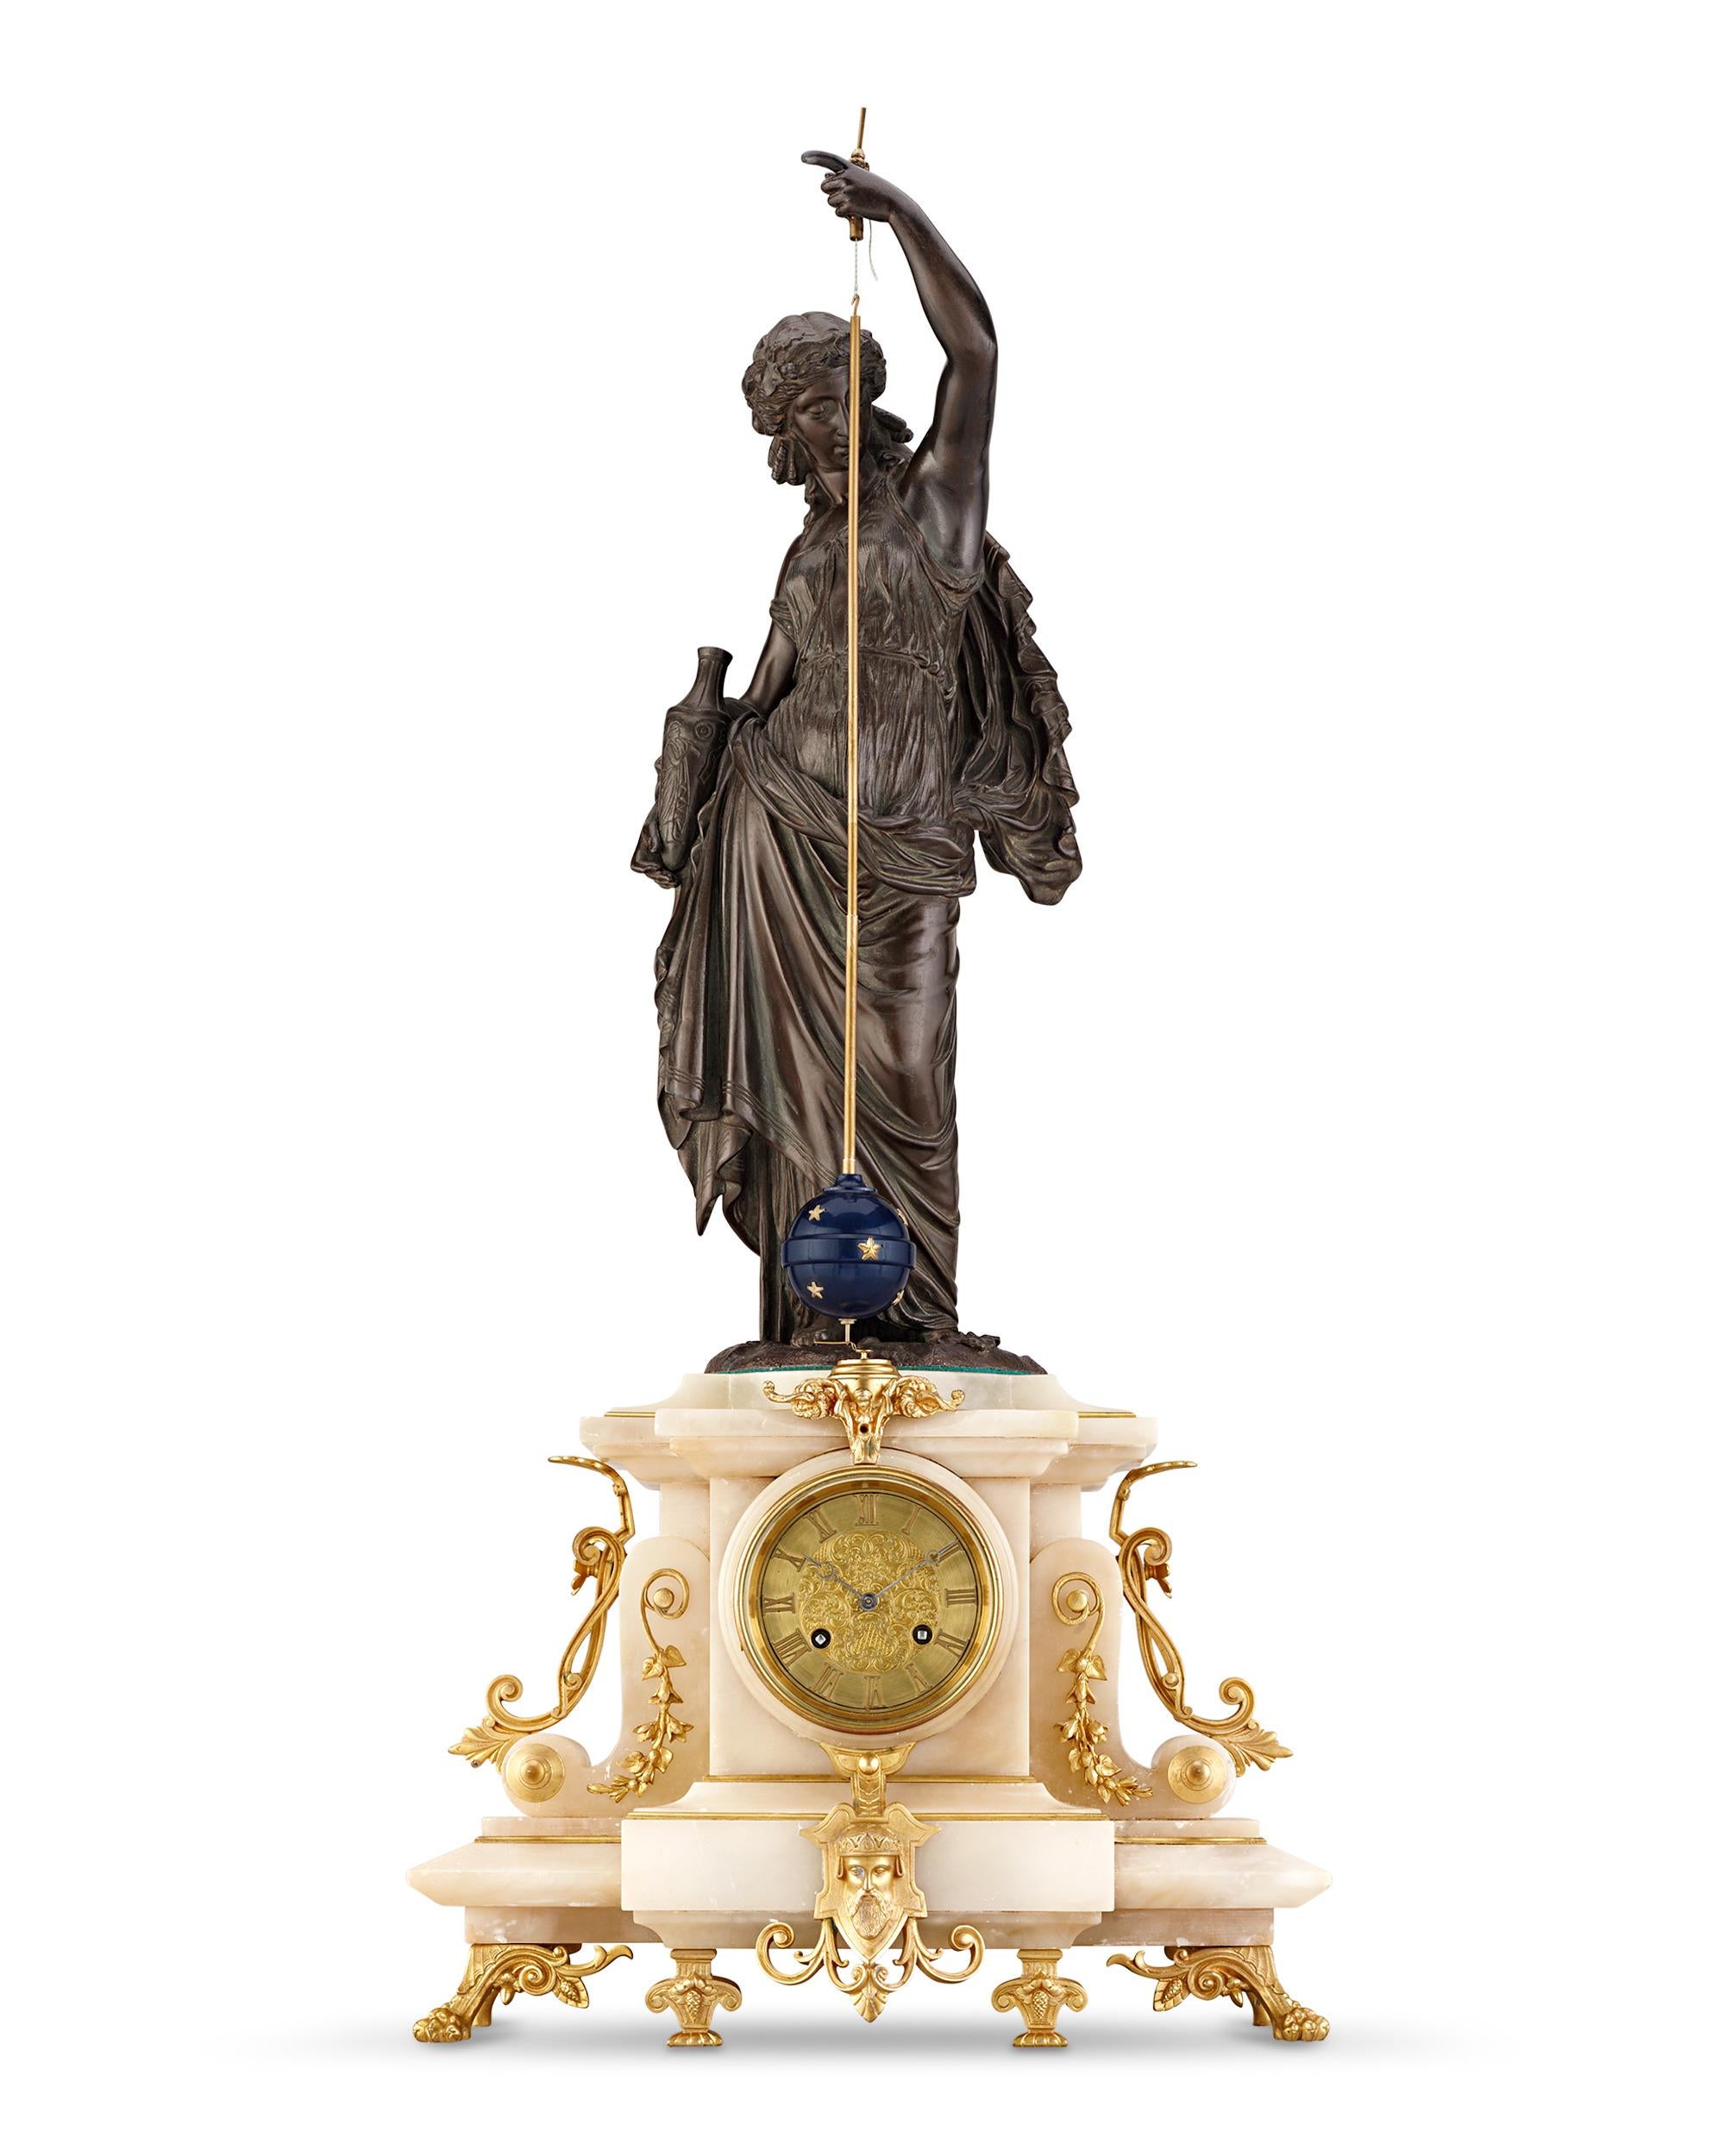 A beautiful example of French horology at its finest, this conical pendulum mystery clock was crafted by renowned French clockmaker and mathematician Achille Brocot. This exquisite timepiece is surmounted by a delightful neoclassical goddess figure